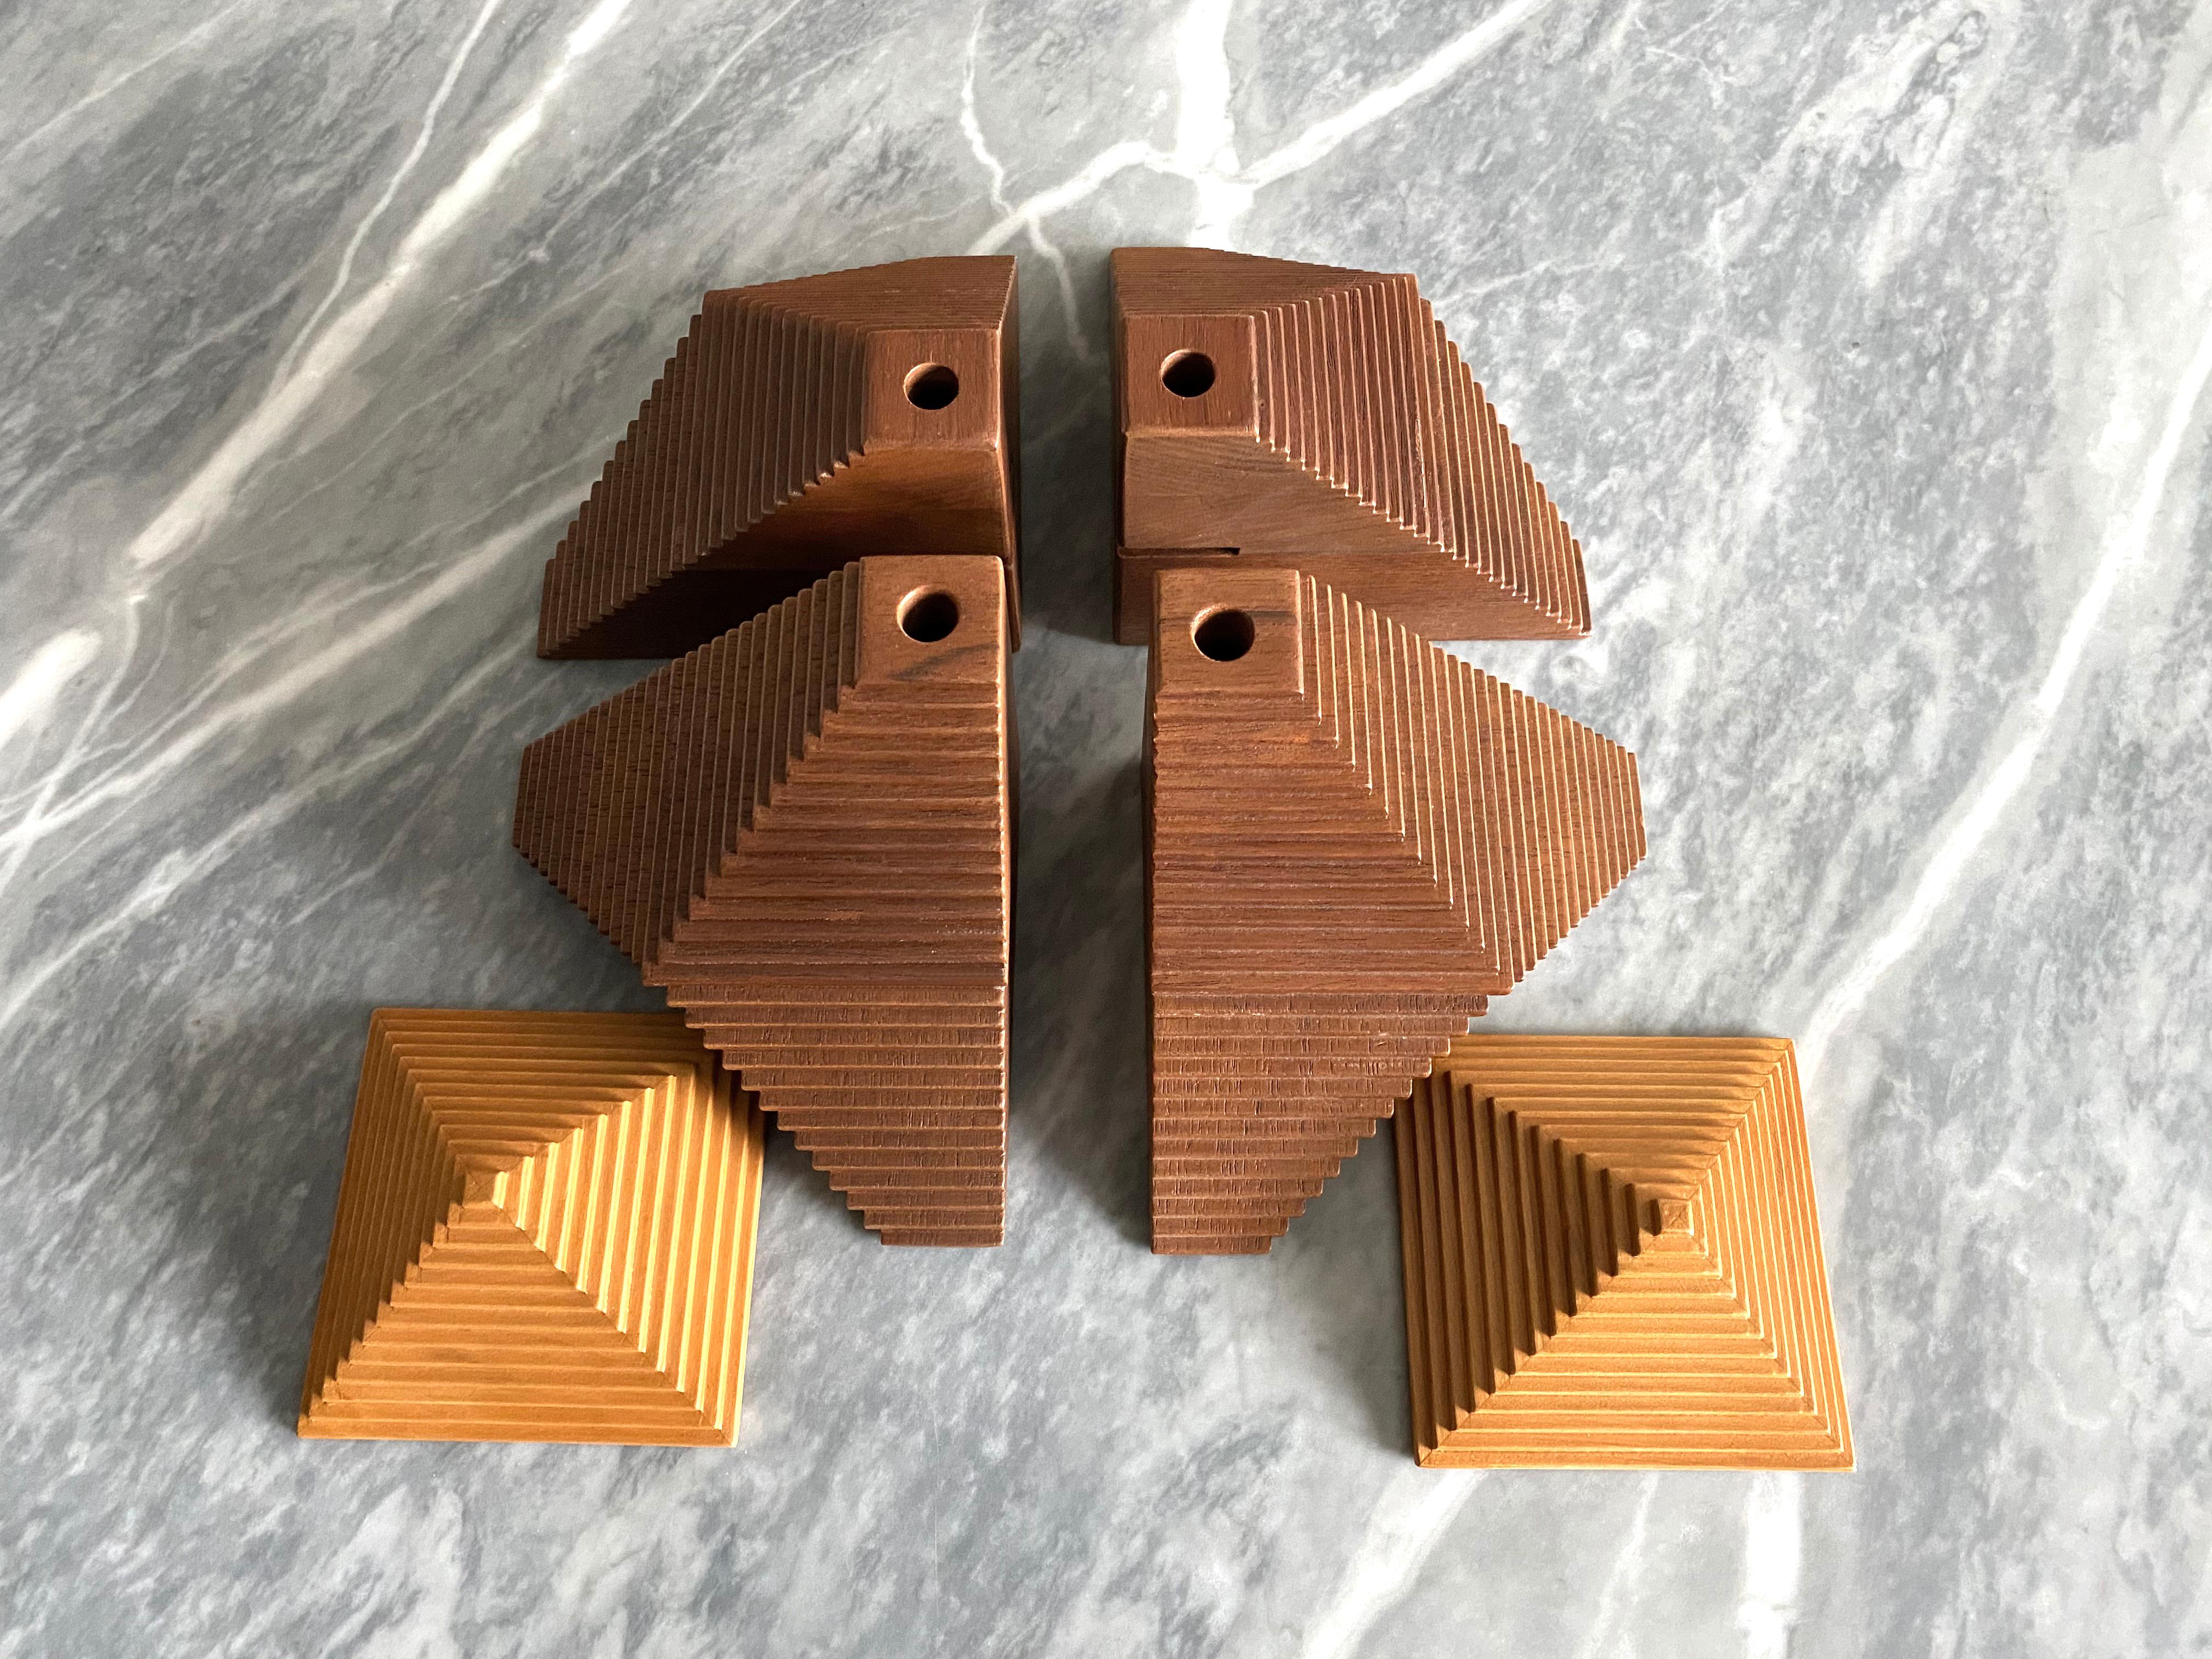 LIMITED EDITION

Based on the architectural study of the iconic stepped pyramids of Pre-Columbian cultures, the Huacas are a collection of objects designed as a system of modules that can be arranged individually or as a group with a multitude of